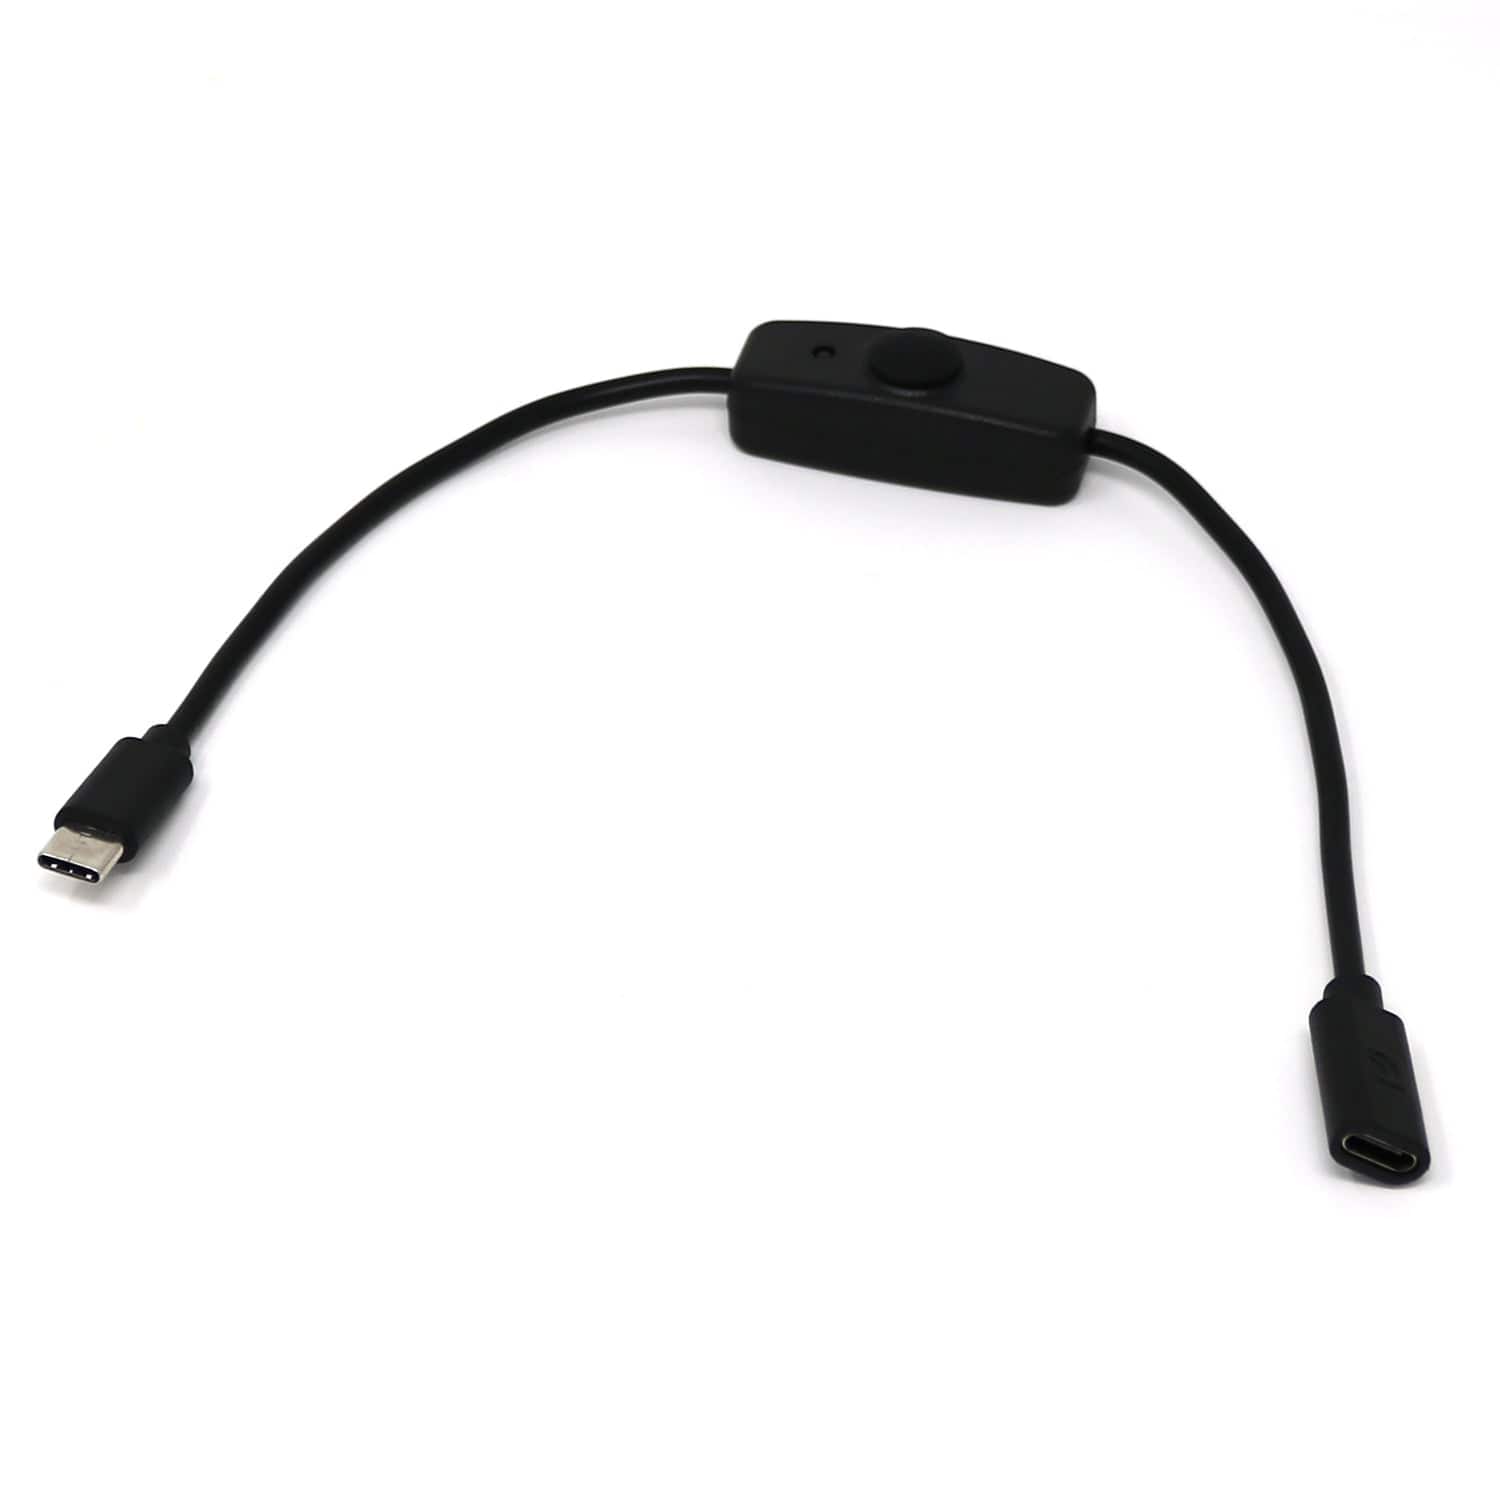 USB-C In-Line Power Switch Cable for Raspberry Pi 4